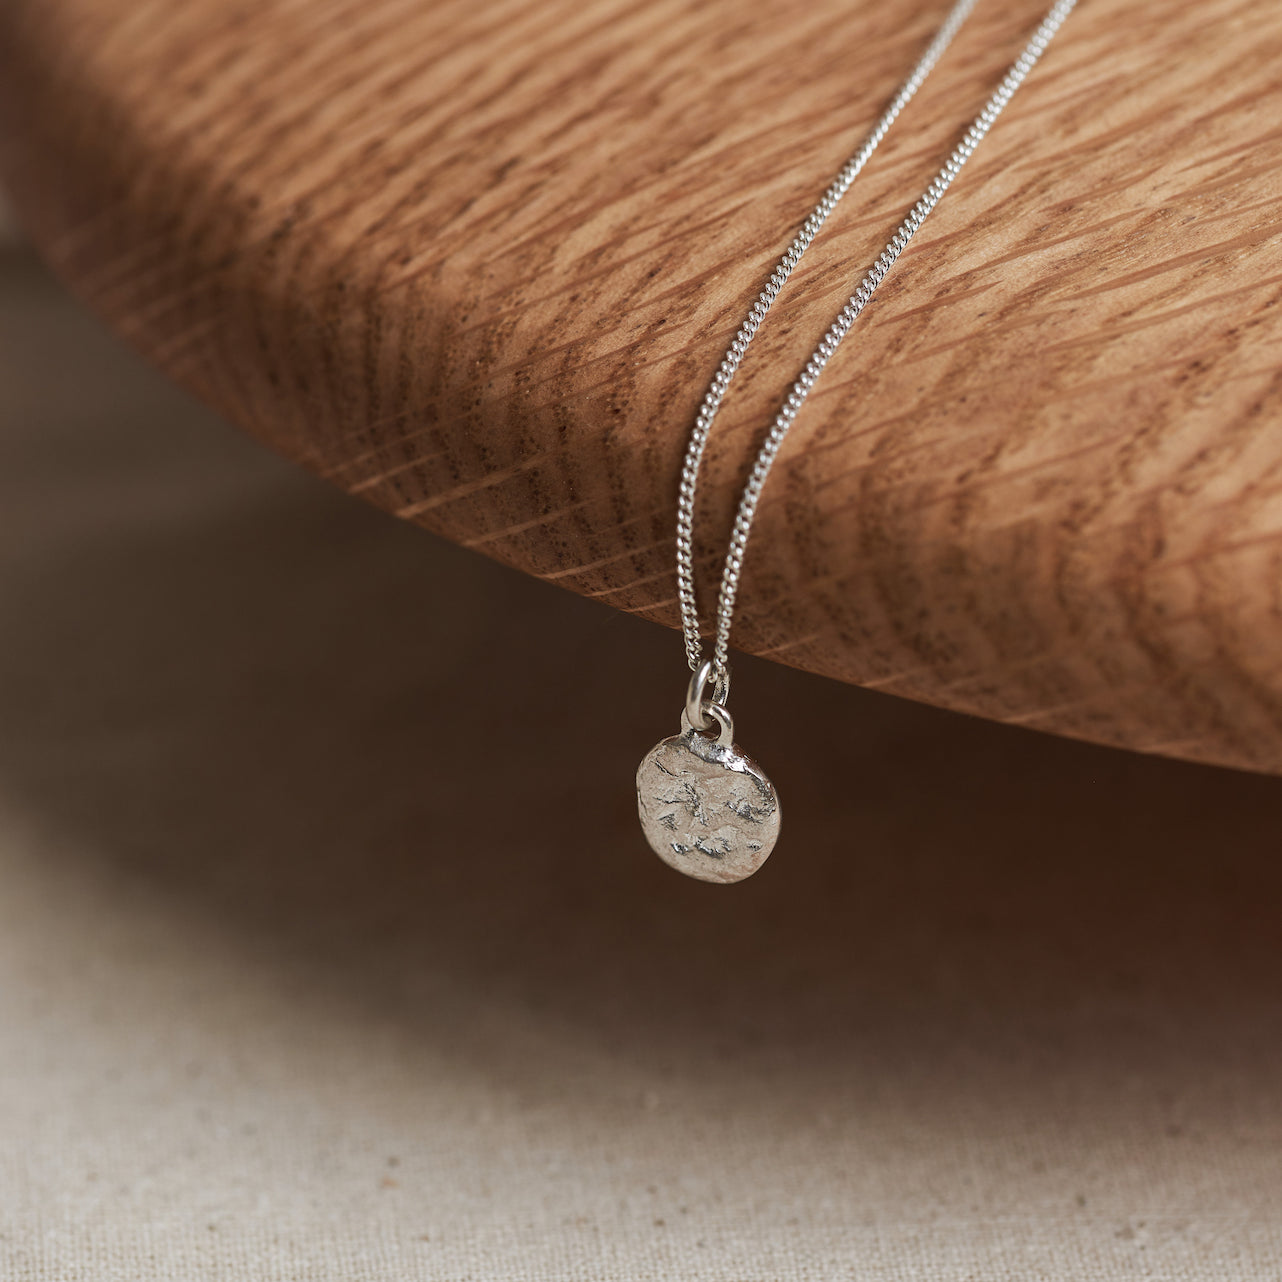 DESIGNED BY MEGAN COLLINS, the “Sage pendant” is part of the Limited Edition Equilibrium Collection that celebrates the art of balance in every aspect of life.